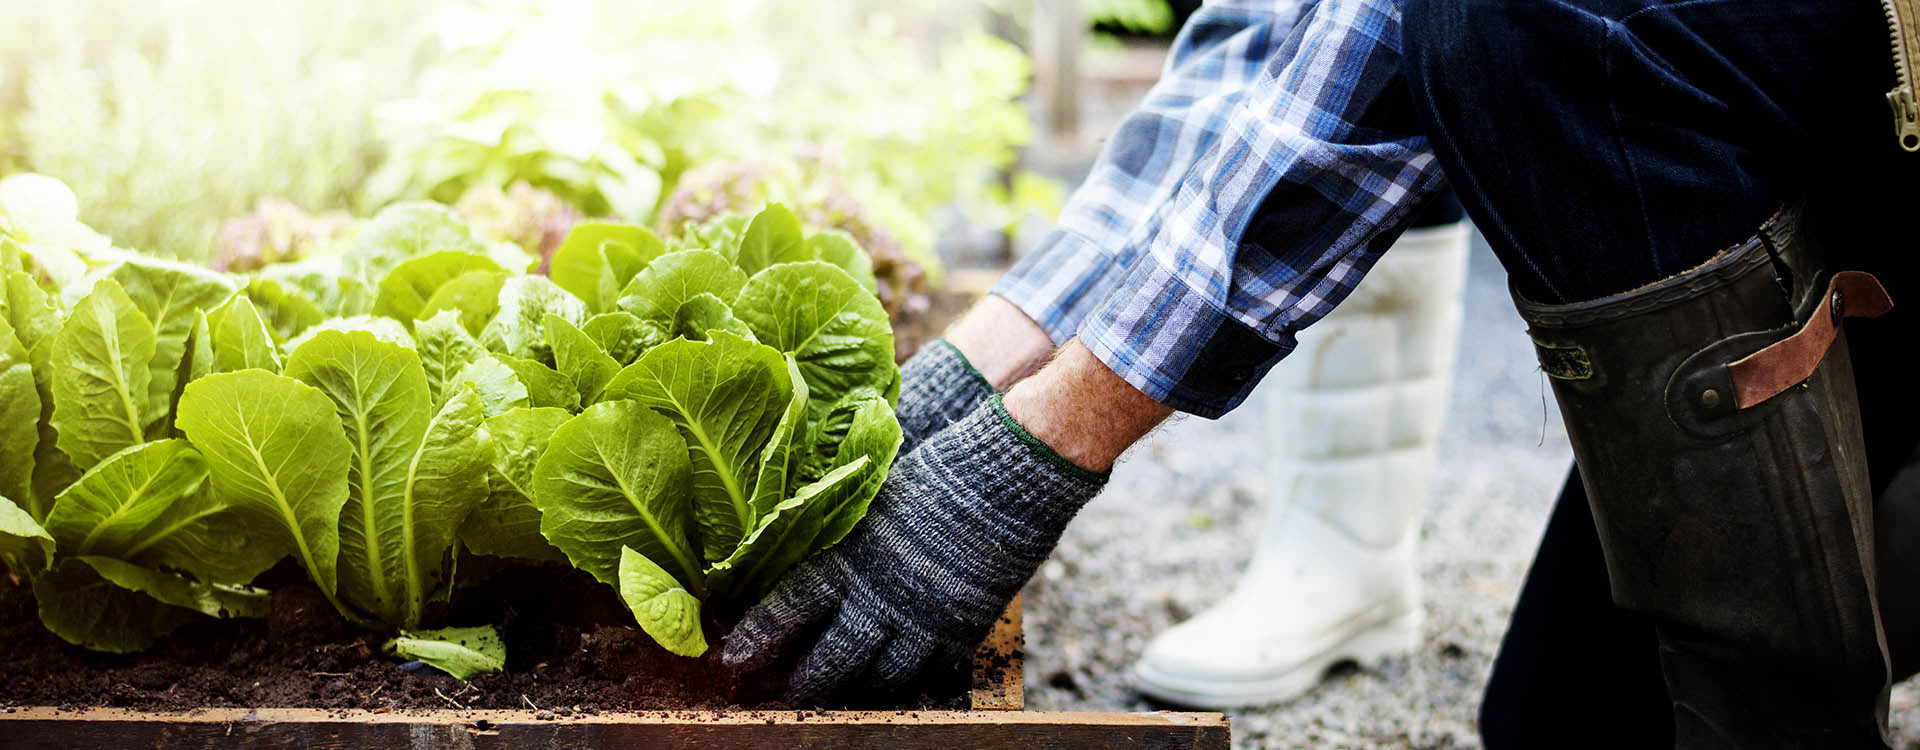 The Complete Guide and Definition of Urban Gardening